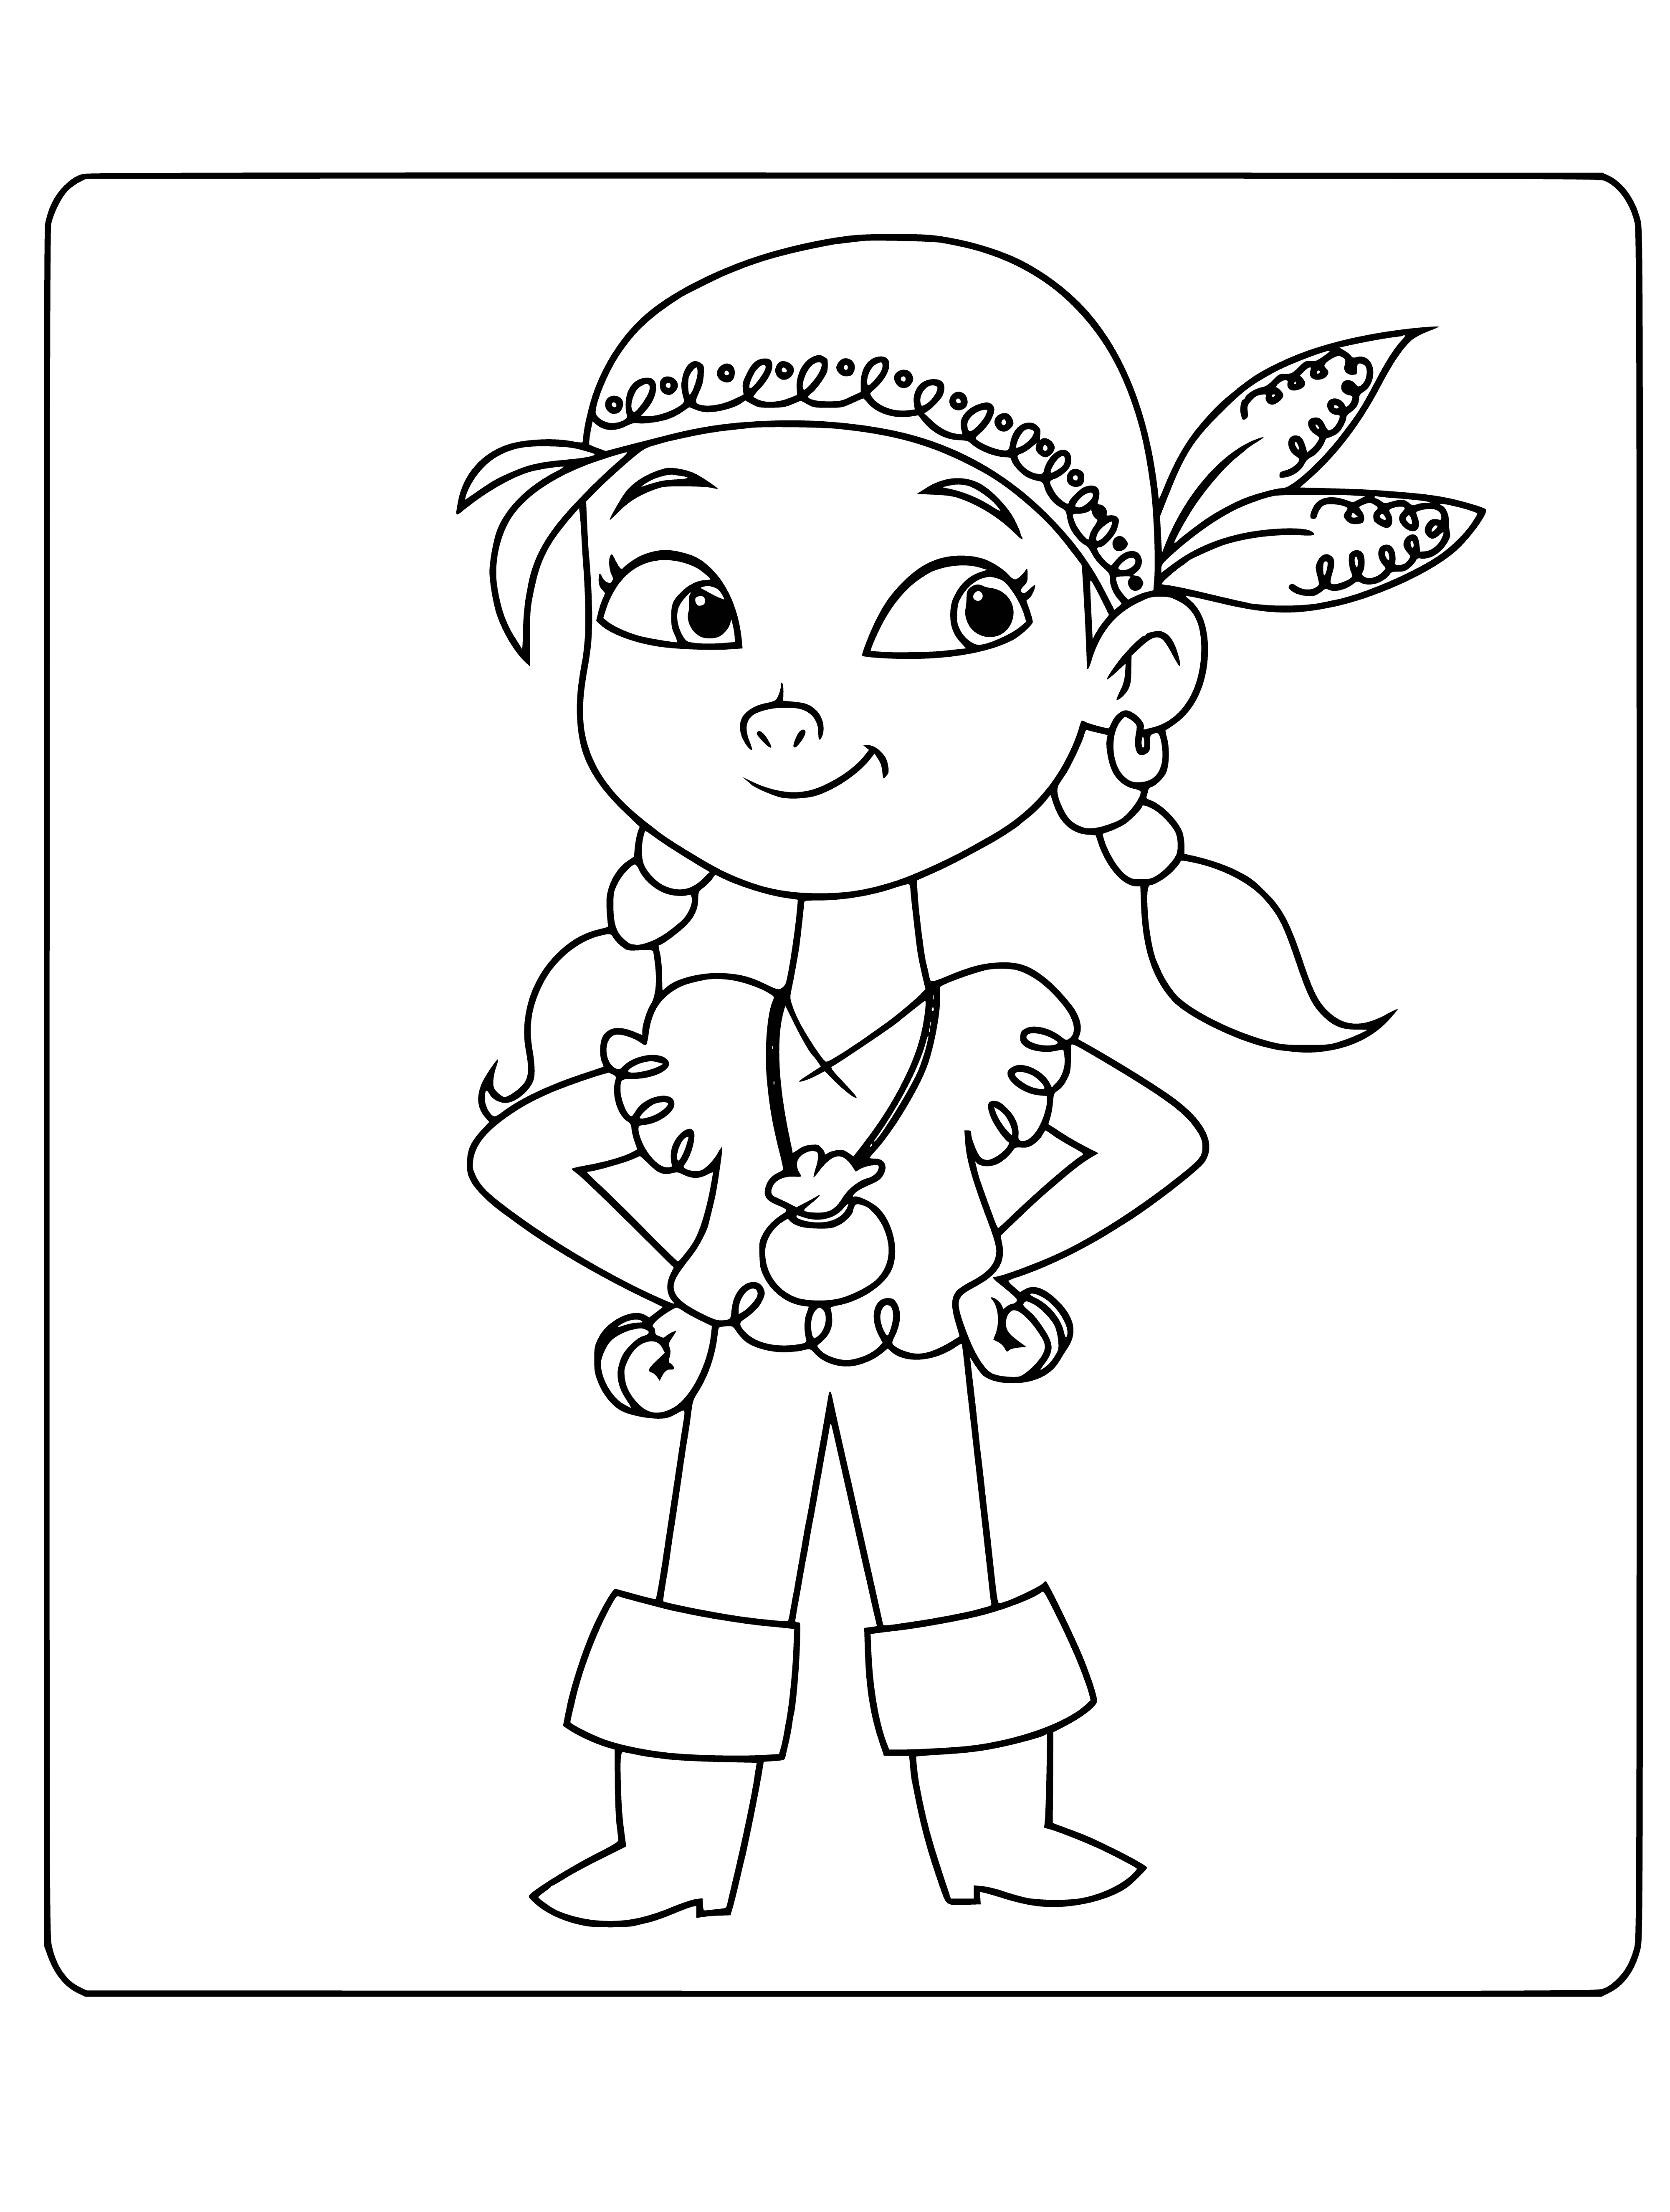 Izzi coloring page